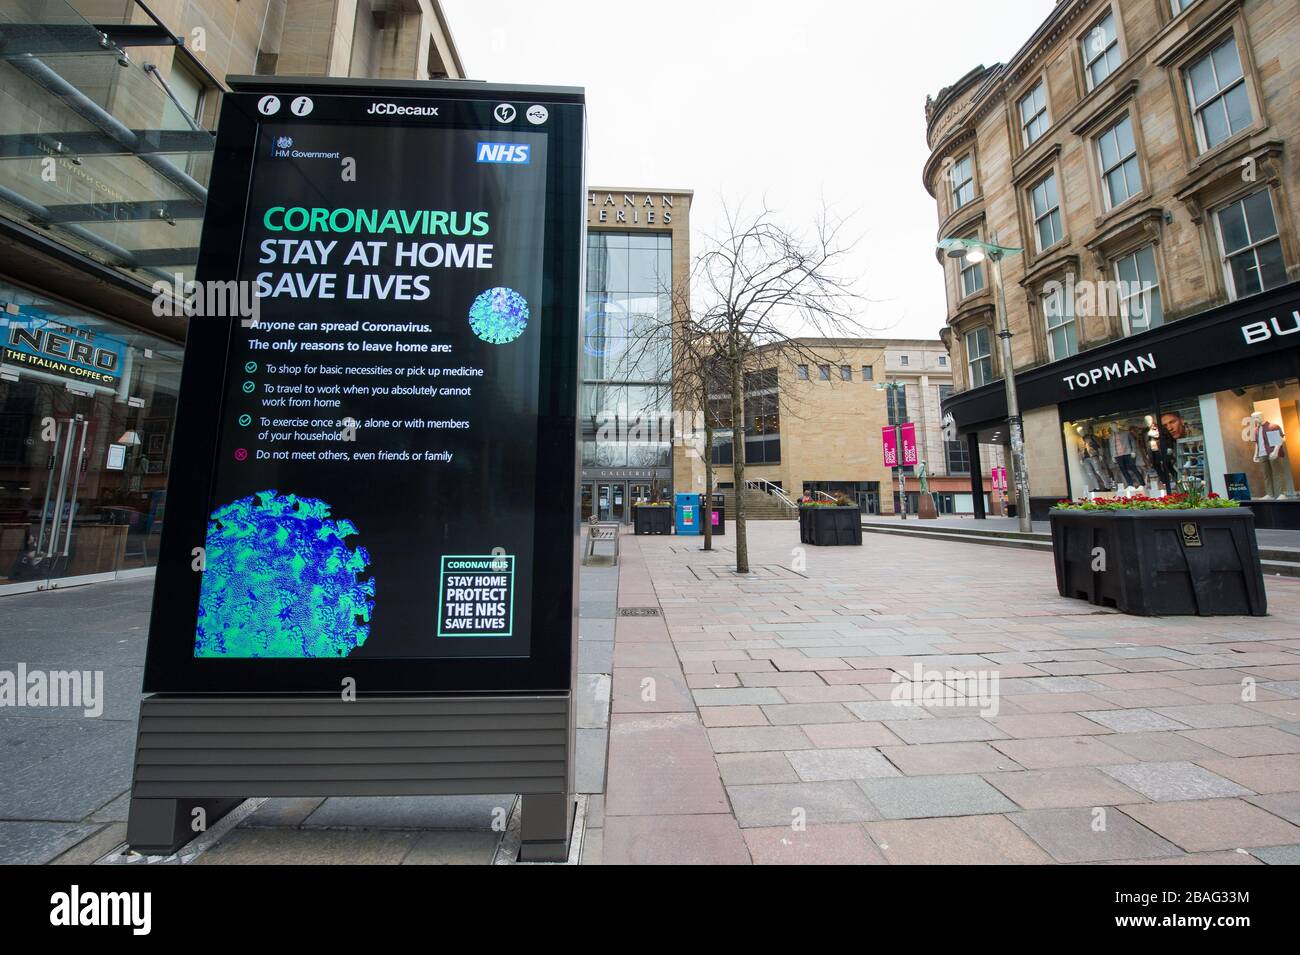 Glasgow, UK. 27th Mar, 2020. Pictured: Public Safety Information Notices advising the public about Coronavirus. Views of Glasgow City Centre showing empty streets, shops closed and empty railway stations during what would normally be a busy street scene with shoppers and people working within the city. The Coronavirus Pandemic has forced the UK Government to order a shut down of all the UK major cities and make people stay at home. Credit: Colin Fisher/Alamy Live News Stock Photo